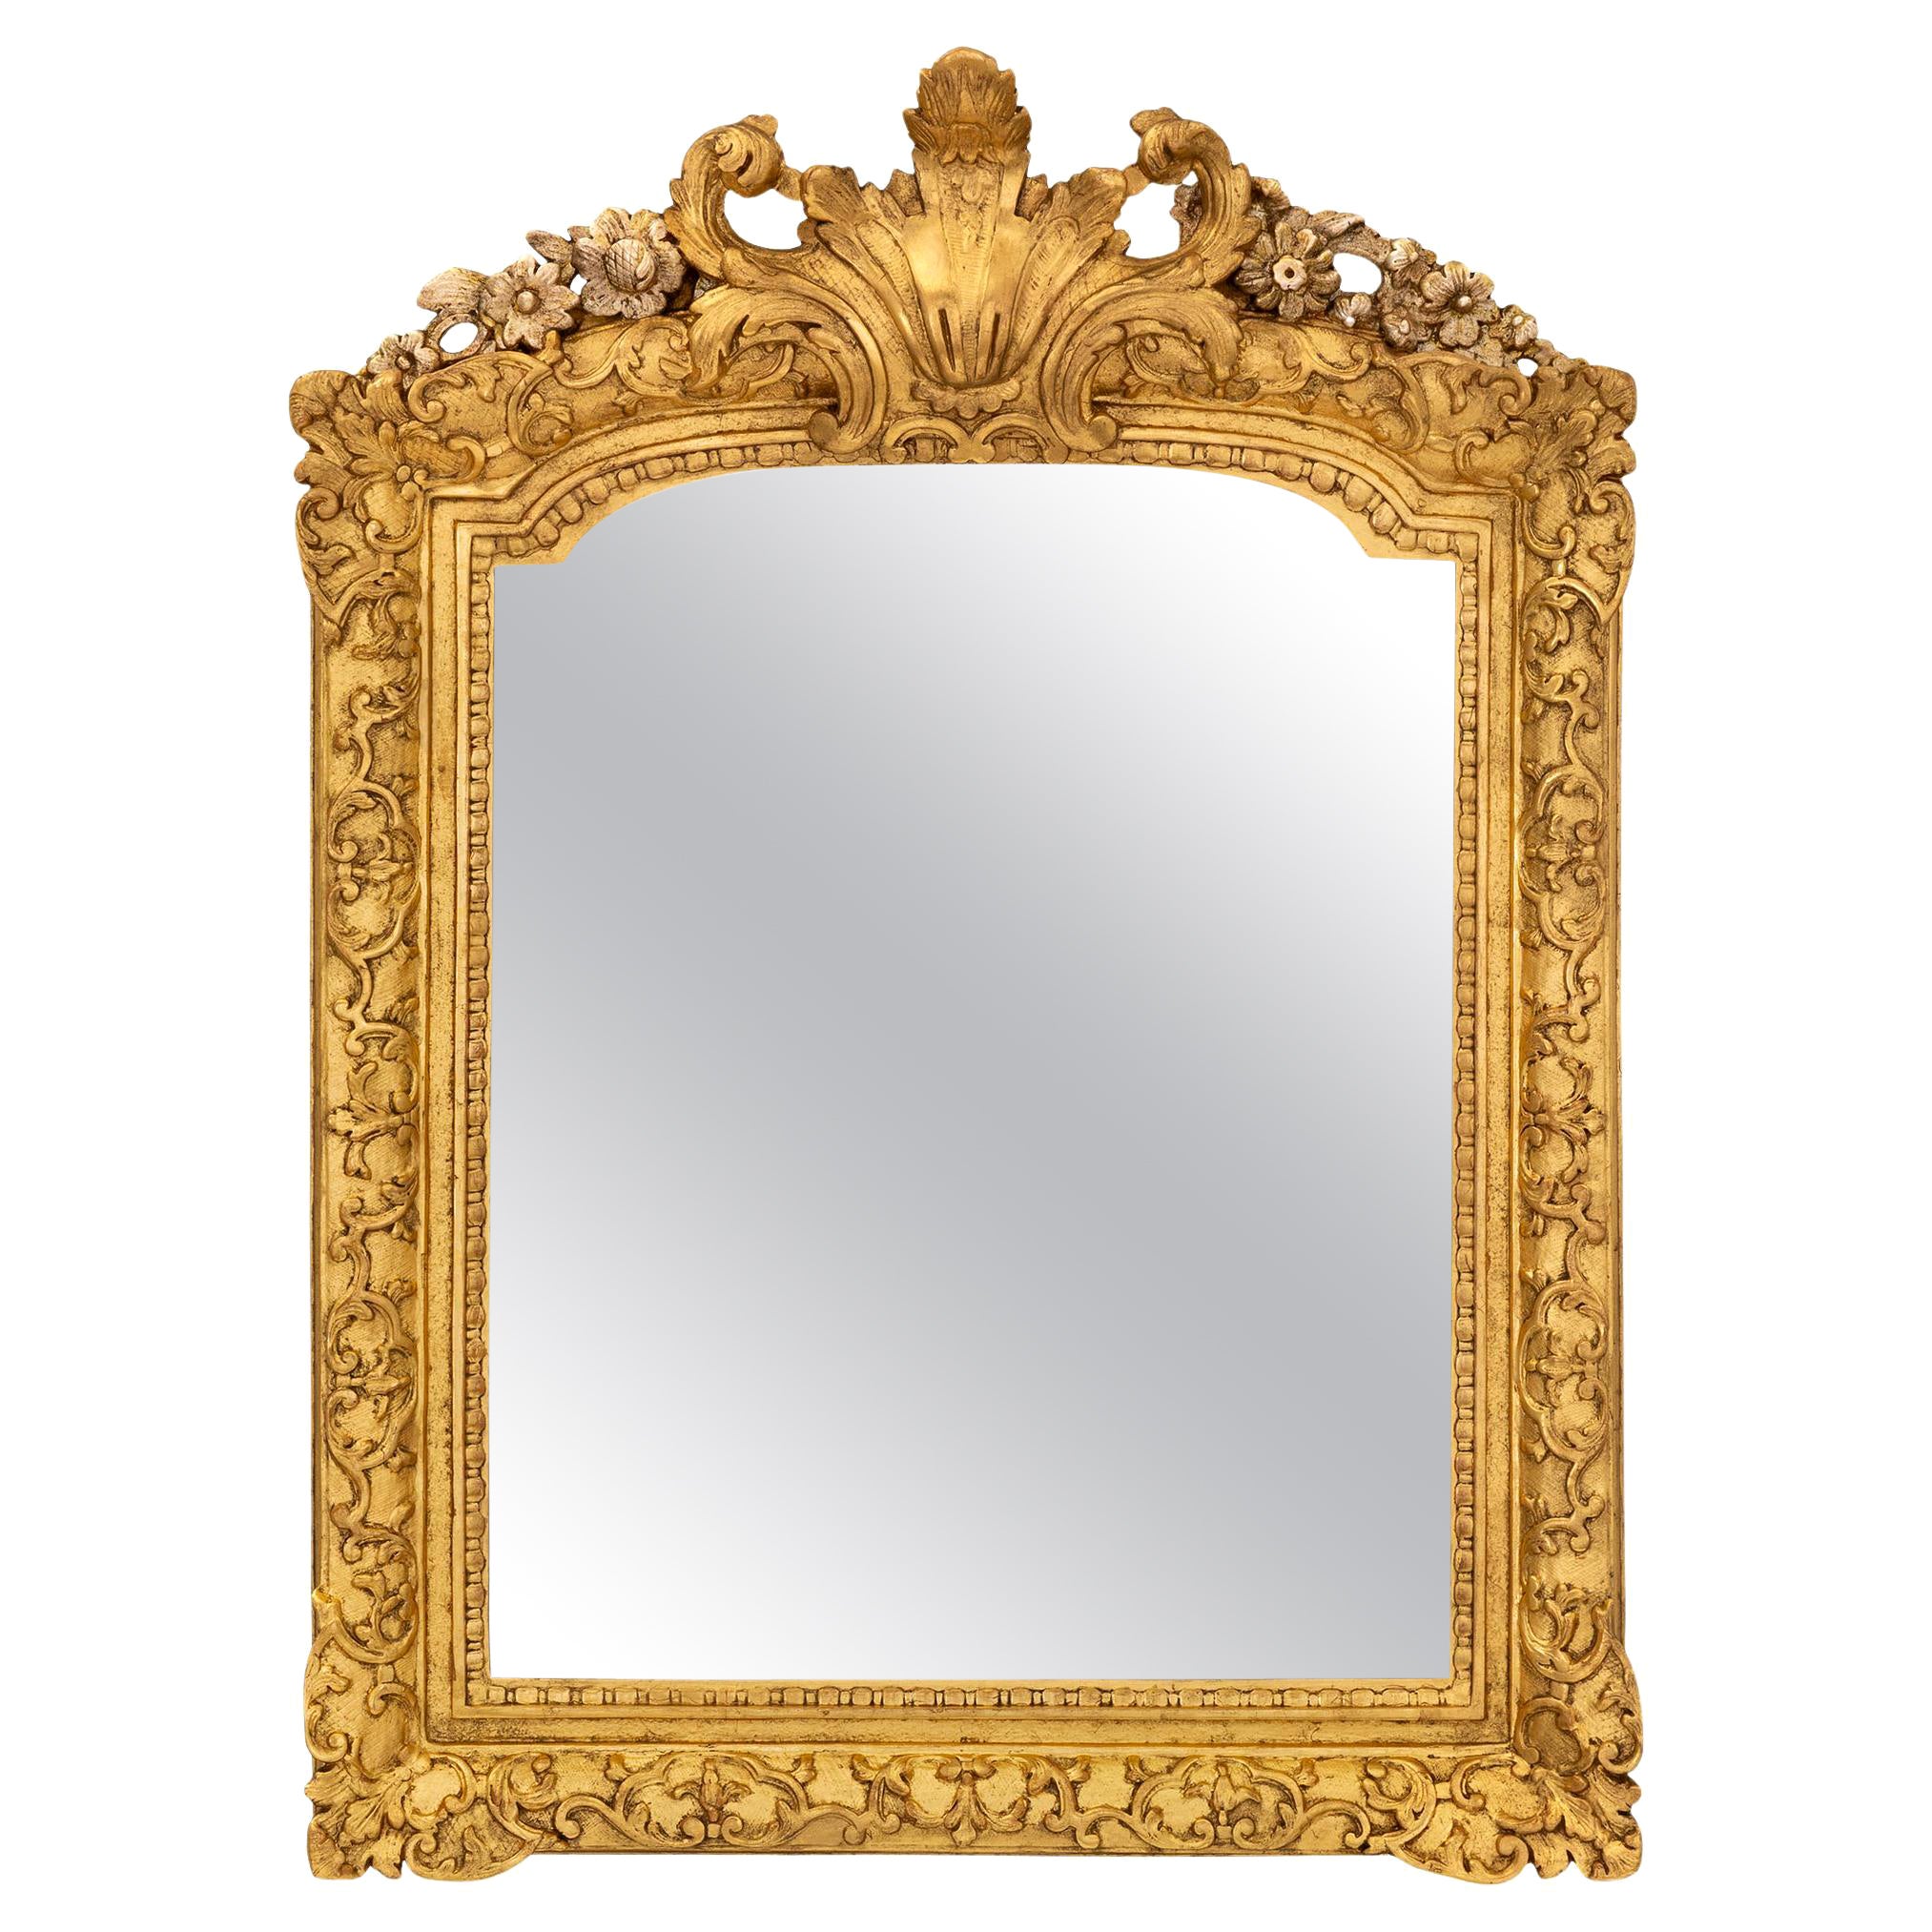 French Early 18th Century Régence Period Giltwood and Mecca Mirror For Sale